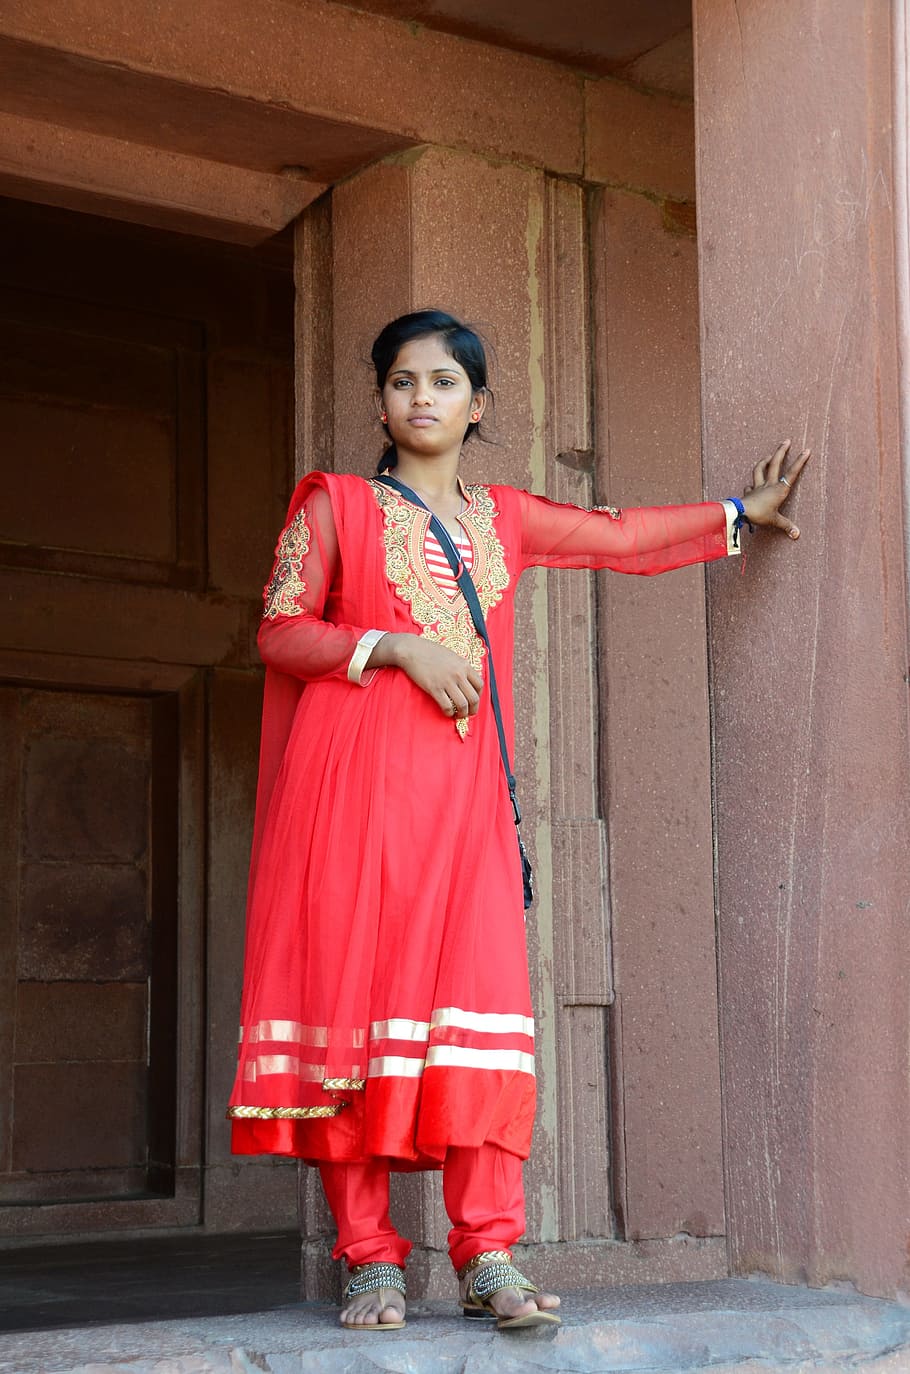 woman, red, abaya, standing, next, brown, concrete, wall, woman in red, india